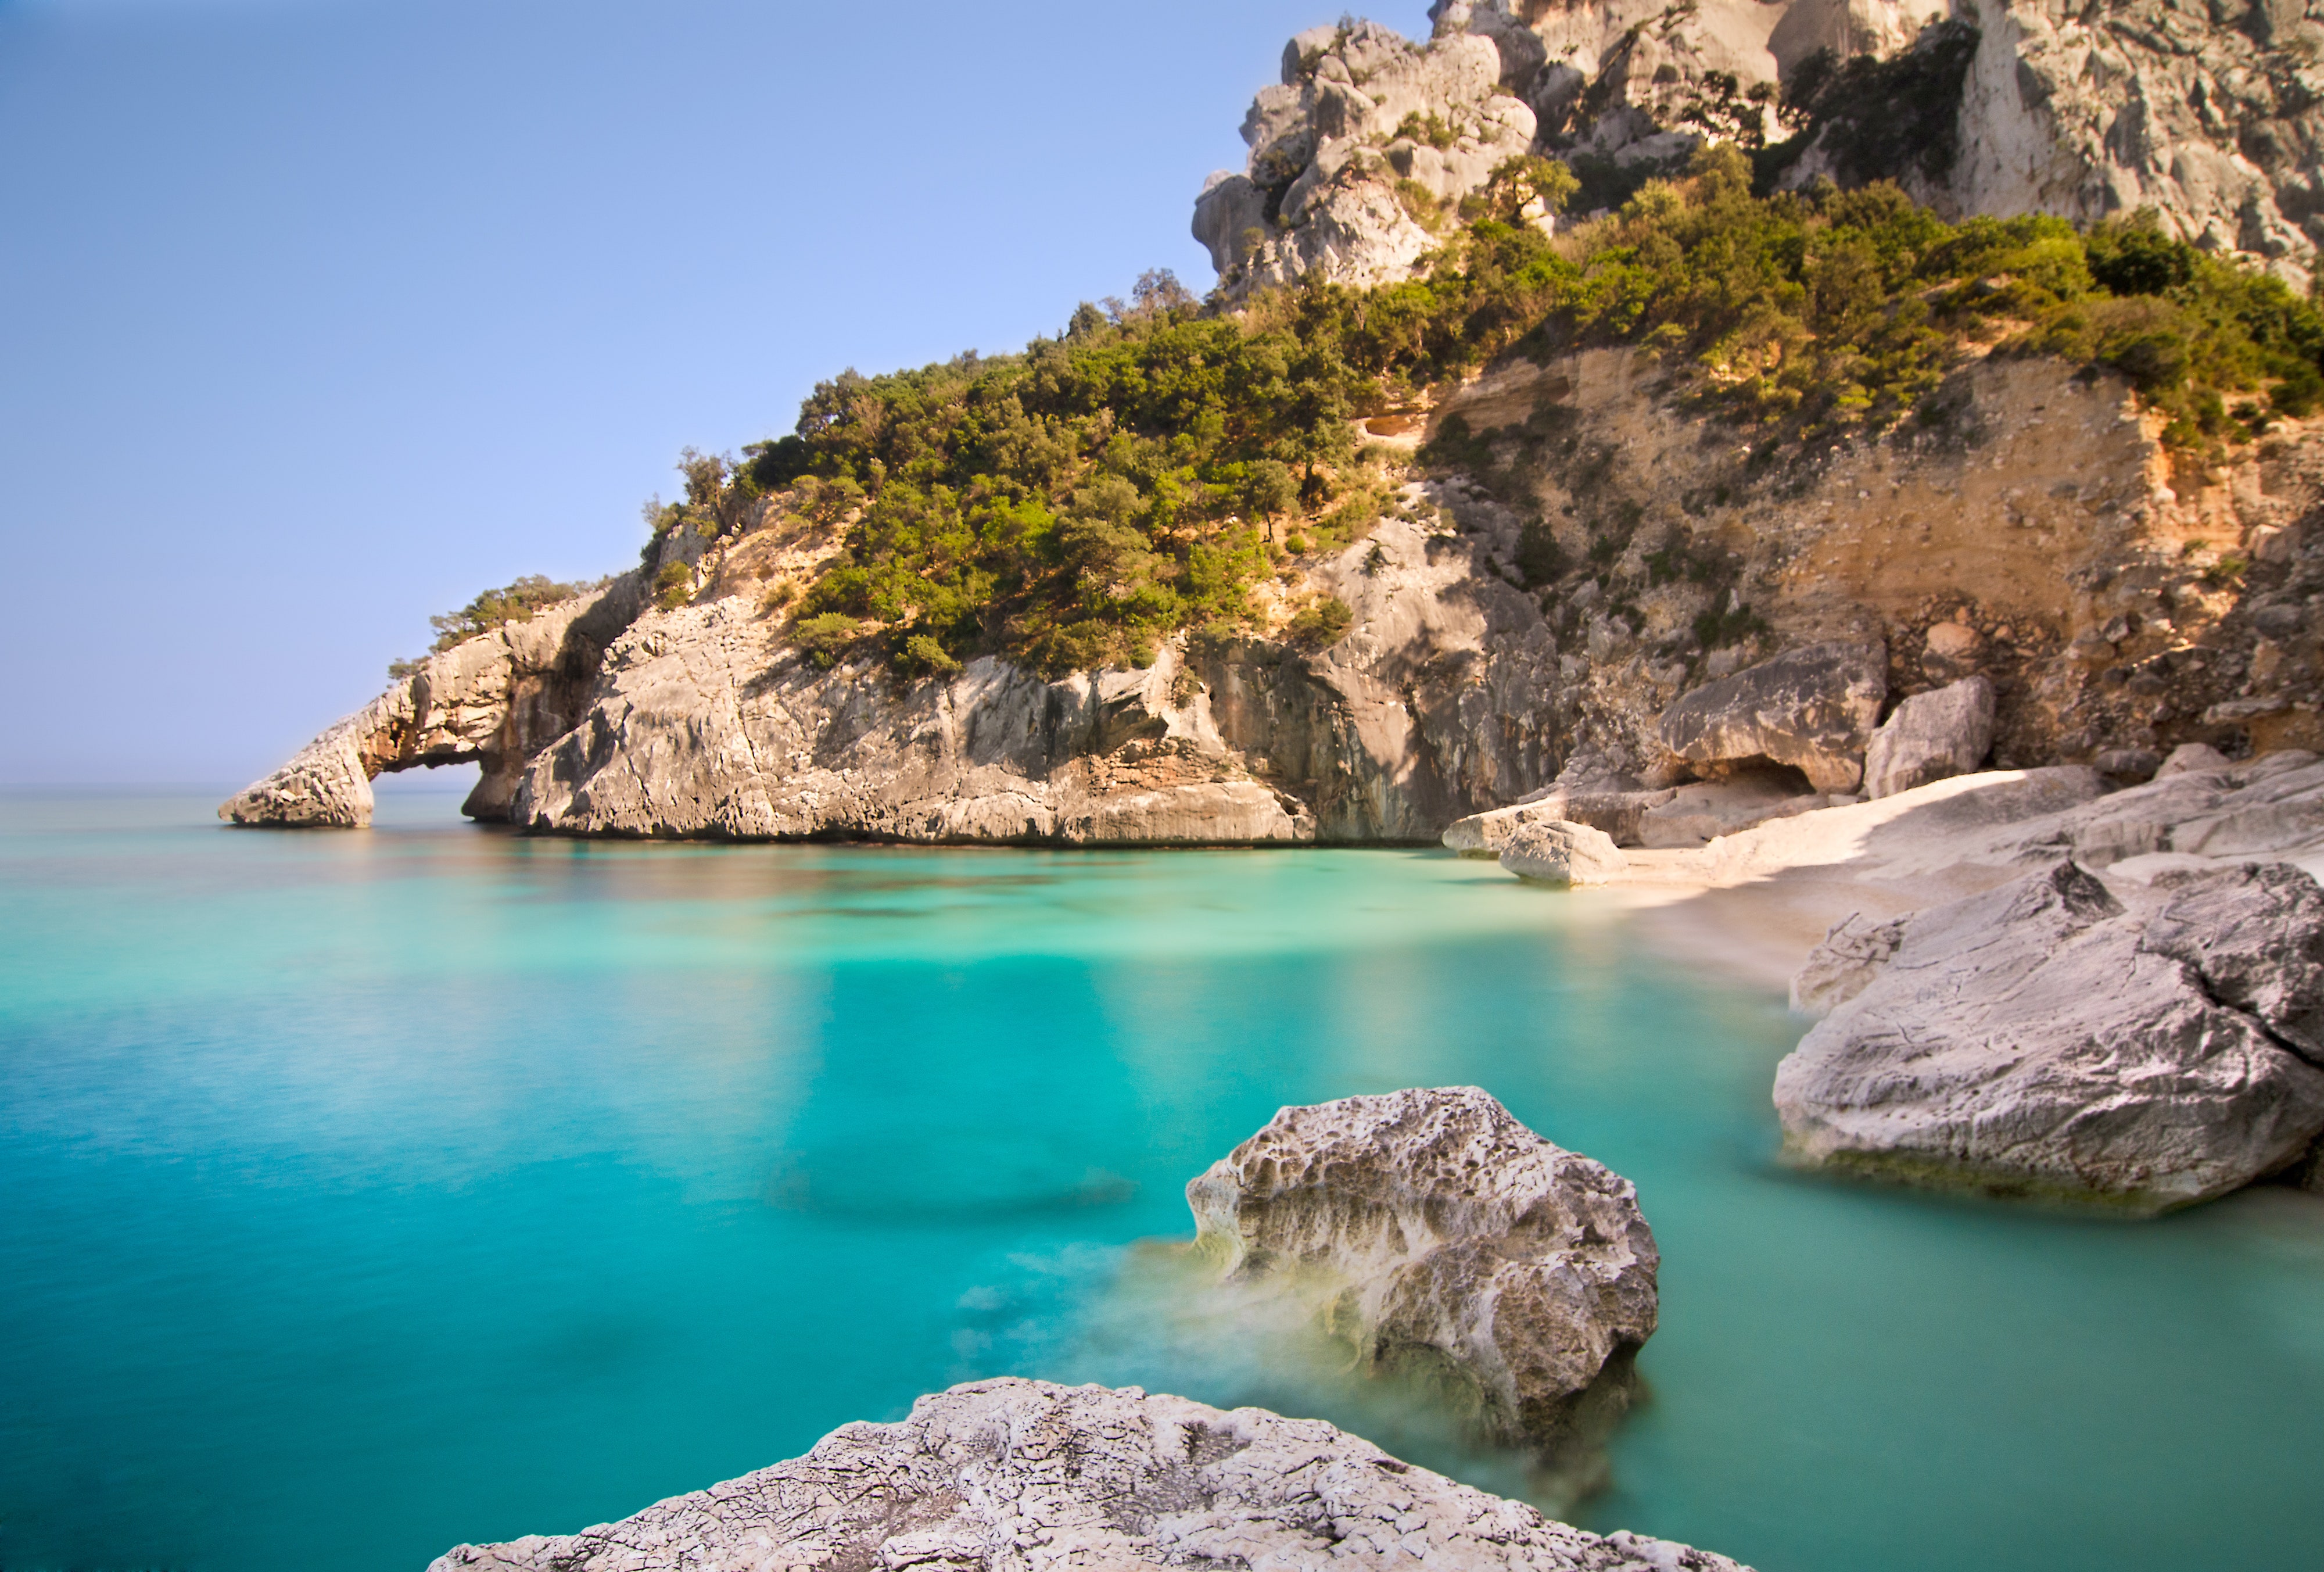 <p>Created by a landslide in 1962, Cala Goloritzé is located at the base of a ravine on <a href="https://www.cntraveler.com/story/exploring-inland-sardinia-italy?mbid=synd_msn_rss&utm_source=msn&utm_medium=syndication">Sardinia</a>’s eastern coast. It’s tiny, but no less beautiful with its limestone cliffs, soft ivory sand, and access to the striking blue-green waters of the Gulf of Orosei. In fact, it’s so special that it was anointed as a <a href="https://www.cntraveler.com/galleries/2014-12-23/most-beautiful-unesco-world-heritage-sites-galapagos-taj-mahal-yosemite?mbid=synd_msn_rss&utm_source=msn&utm_medium=syndication">UNESCO World Heritage Site</a> in 1995, and is best known for a two incredible rock formations: a towering spire and a natural stone arch.</p> <p>Cala Goloritzé is accessible via car-and-foot (be prepared for a short though rocky hike) from Santa Maria Navarrese, home to the lush <a href="https://cna.st/affiliate-link/9B6f5kDzu8NHk3BVDnrLhuGHzKJVxw59gs5zVA8C1vPxfhDS5zbtpuEWYRYboPATBWZx5pkjd4dxaxfQytgAoWb2rQ78gPj7mrmvdmtaPUtJEzL8CutcX6t94RWM5Efu4CEcEtj6HFGbUBcZB4X82NQoeyhxoUh4pjnheMvdDnGMFWB9kBRzMDjkMRDg4YtF8U" rel="sponsored">Lanthia Resort</a>, which has a private beach for lazier days. To get here, drive up from Cagliari, Sardinia’s capital, which you can reach via plane from Rome or Milan, or overnight ferry from Naples.</p><p>Sign up to receive the latest news, expert tips, and inspiration on all things travel</p><a href="https://www.cntraveler.com/newsletter/the-daily?sourceCode=msnsend">Inspire Me</a>